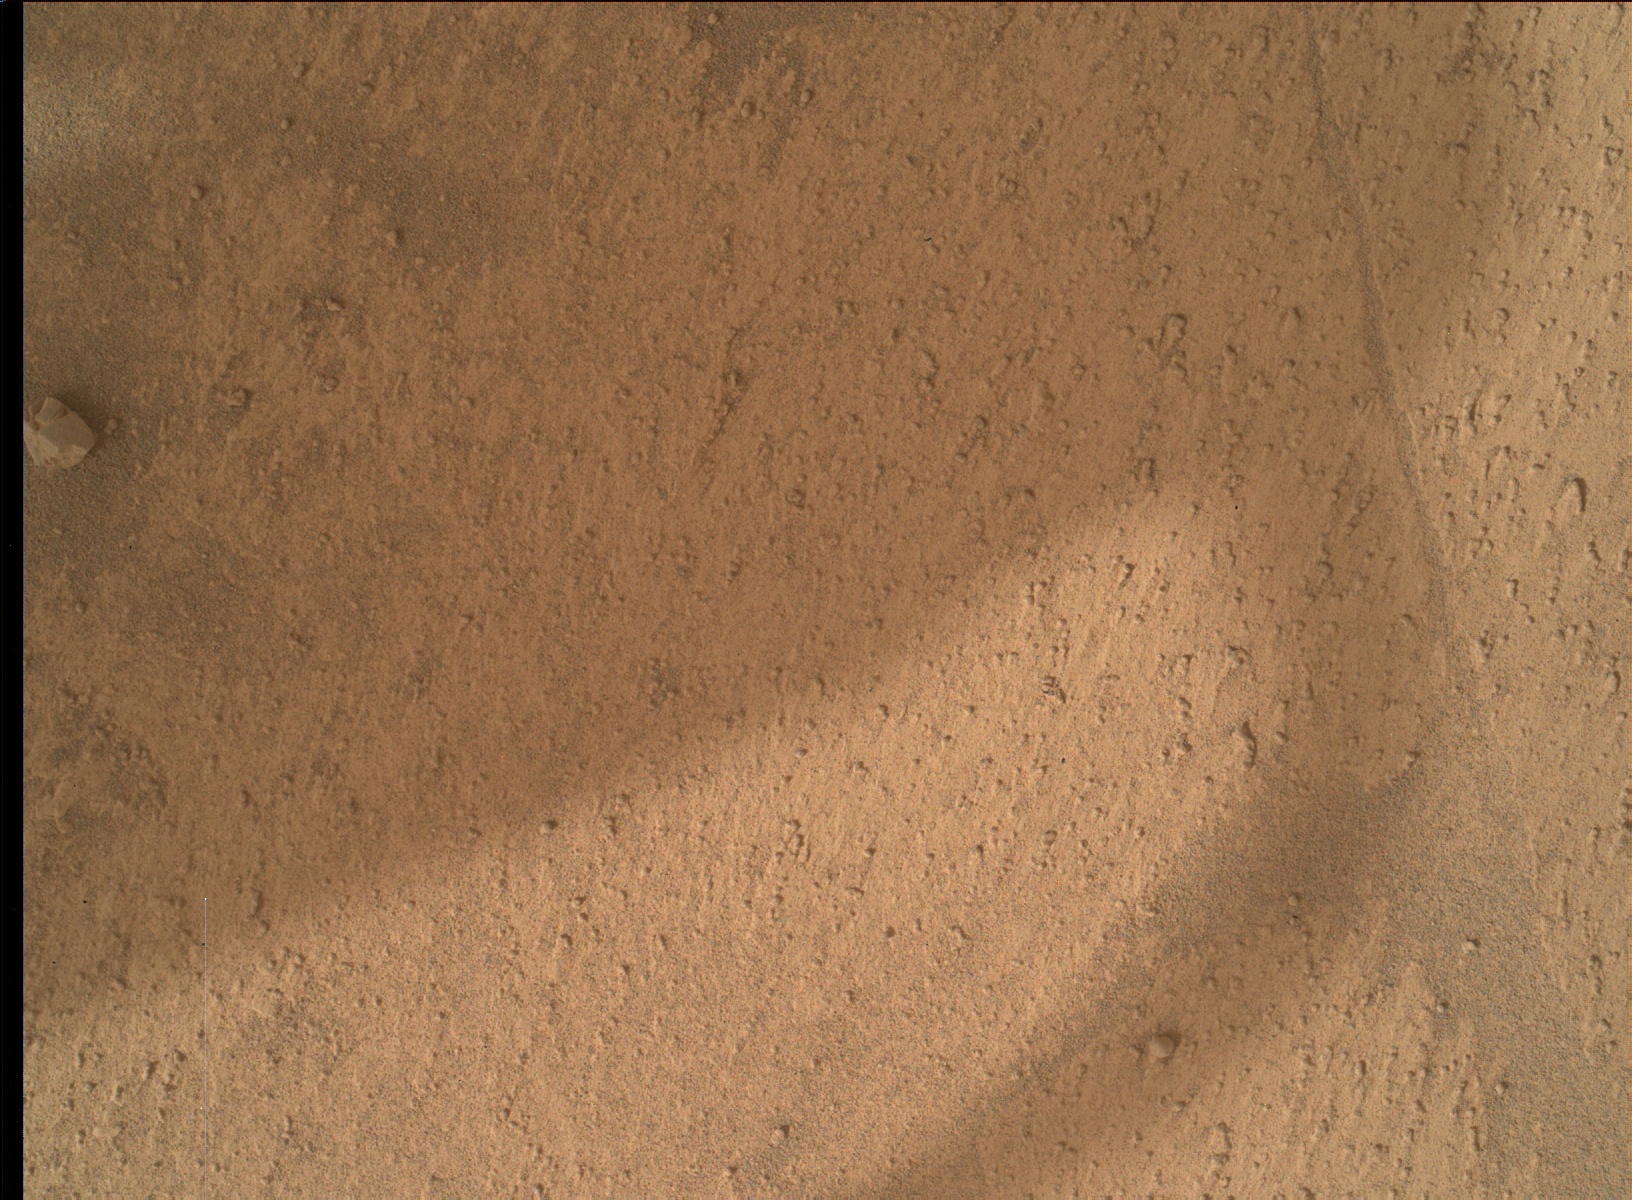 Nasa's Mars rover Curiosity acquired this image using its Mars Hand Lens Imager (MAHLI) on Sol 3378